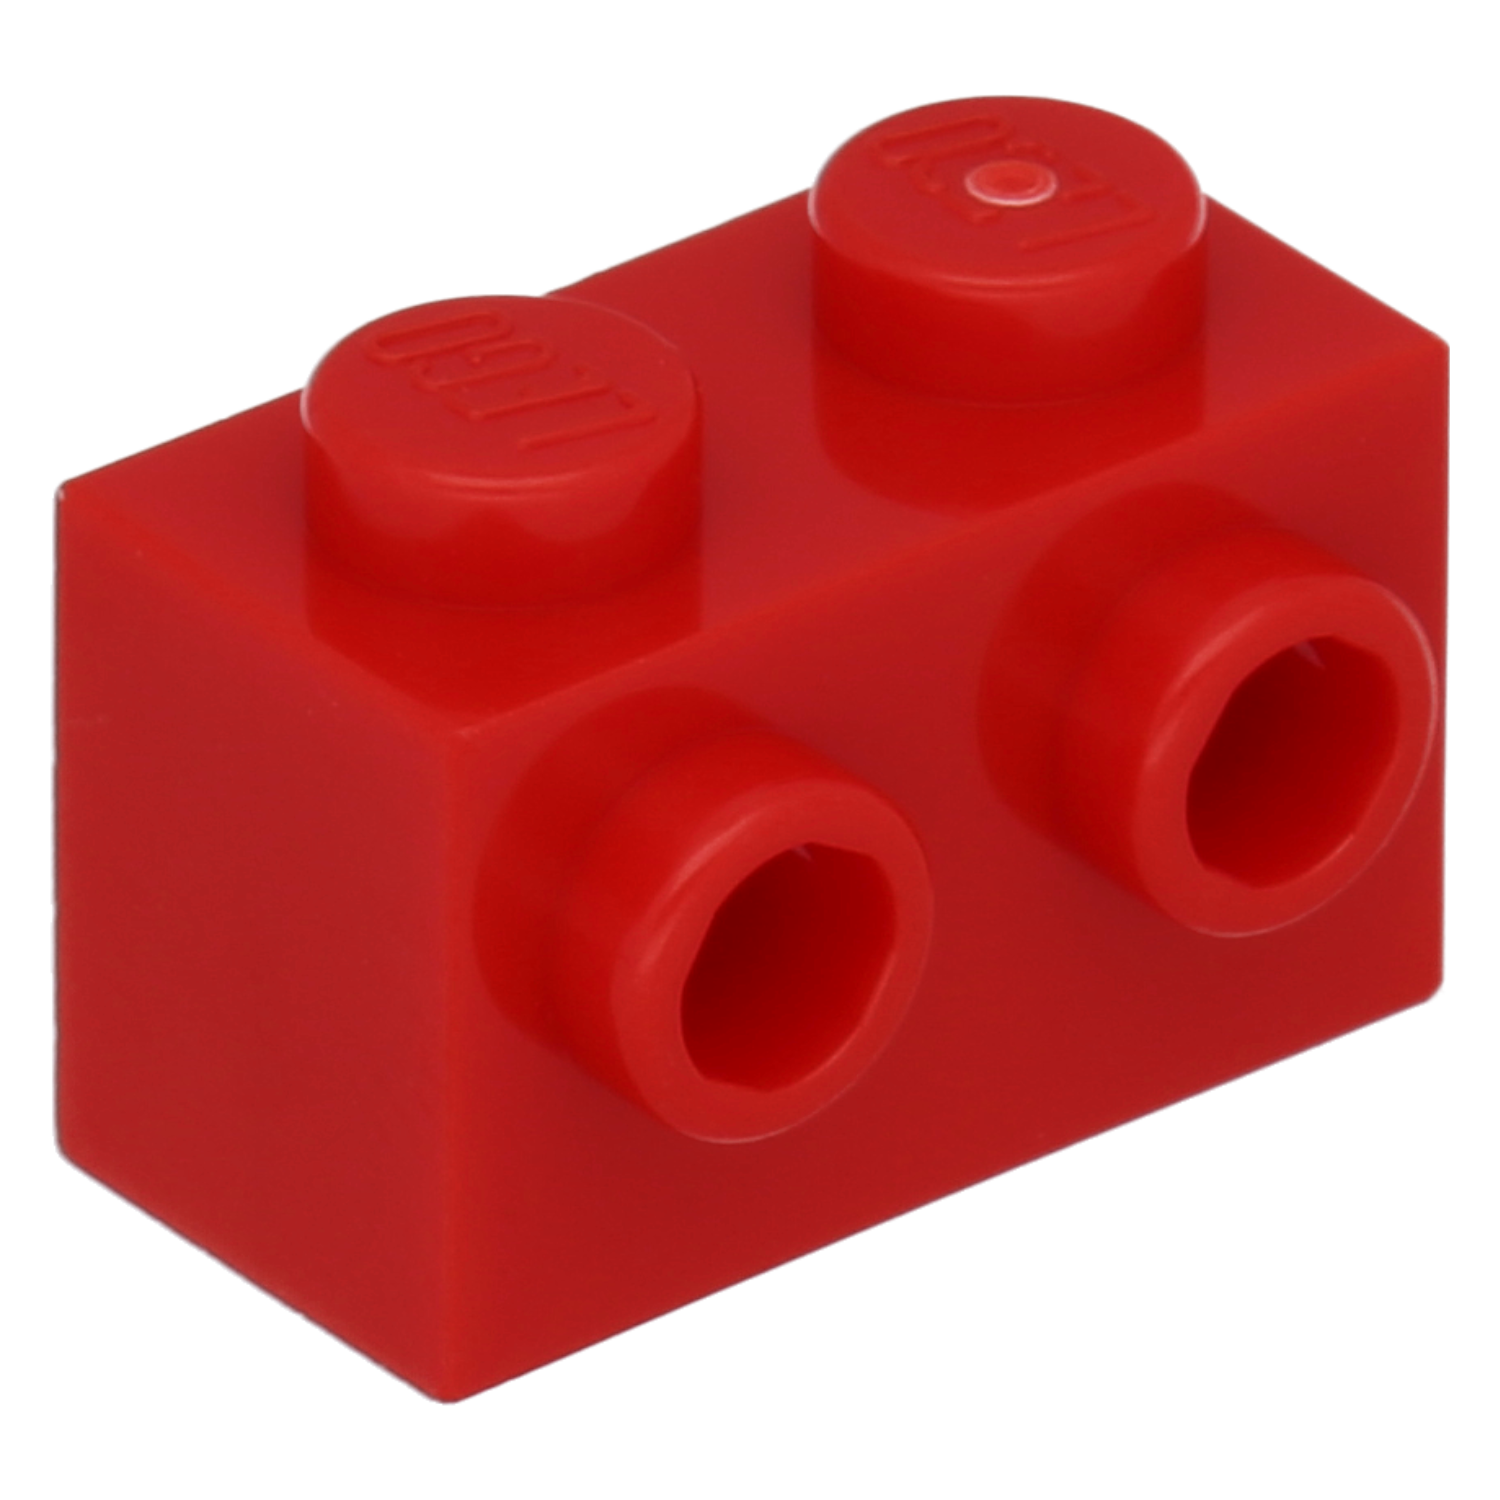 LEGO stones (modified) - 1 x 2 with side knobs